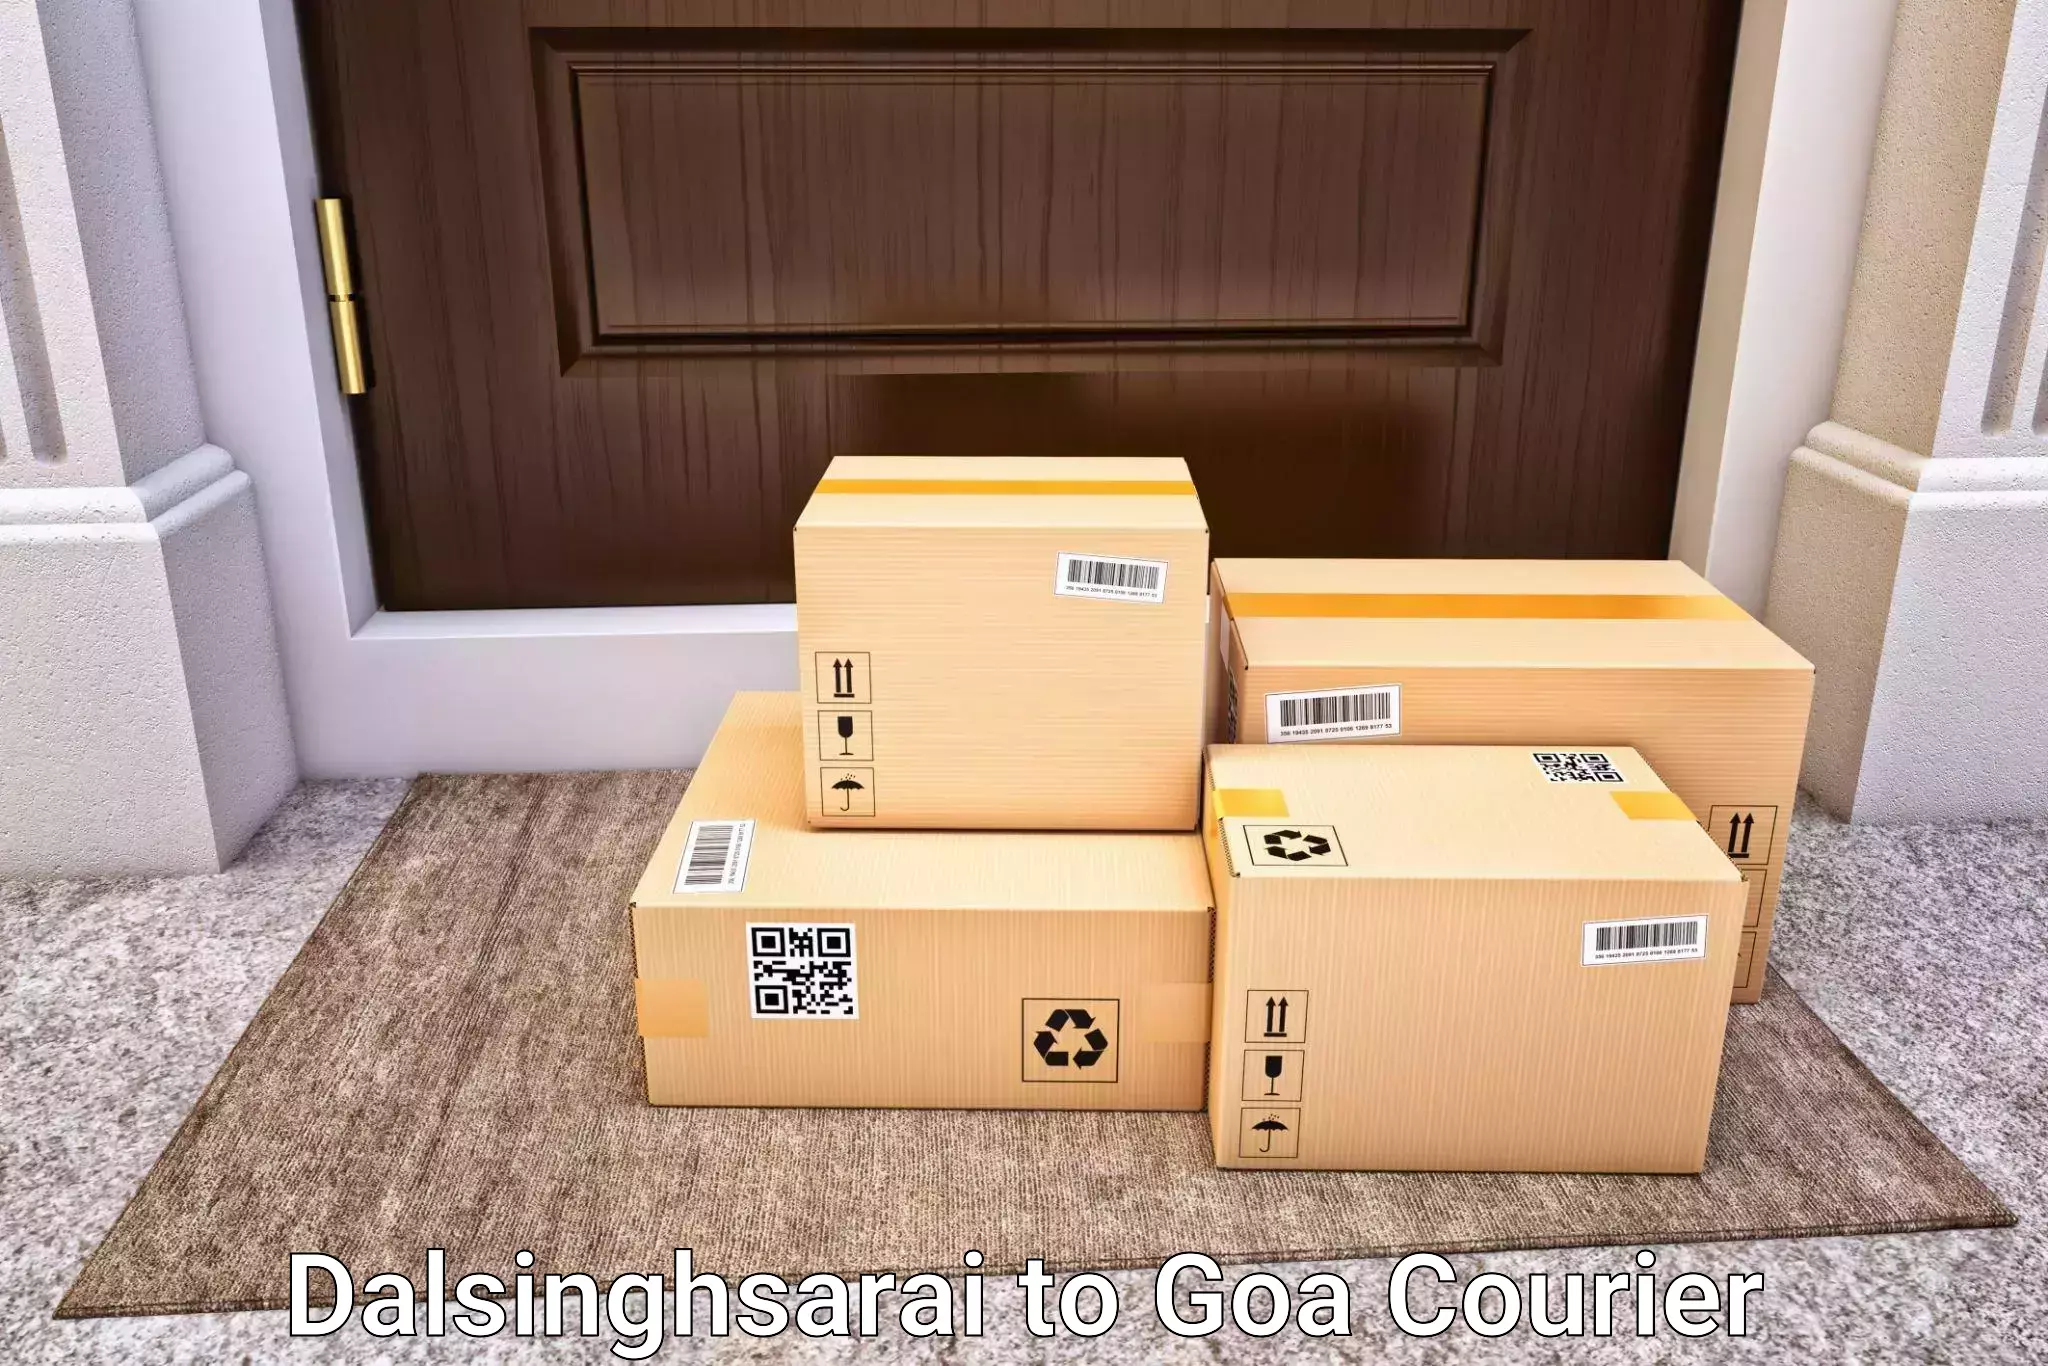 Baggage delivery scheduling Dalsinghsarai to Goa